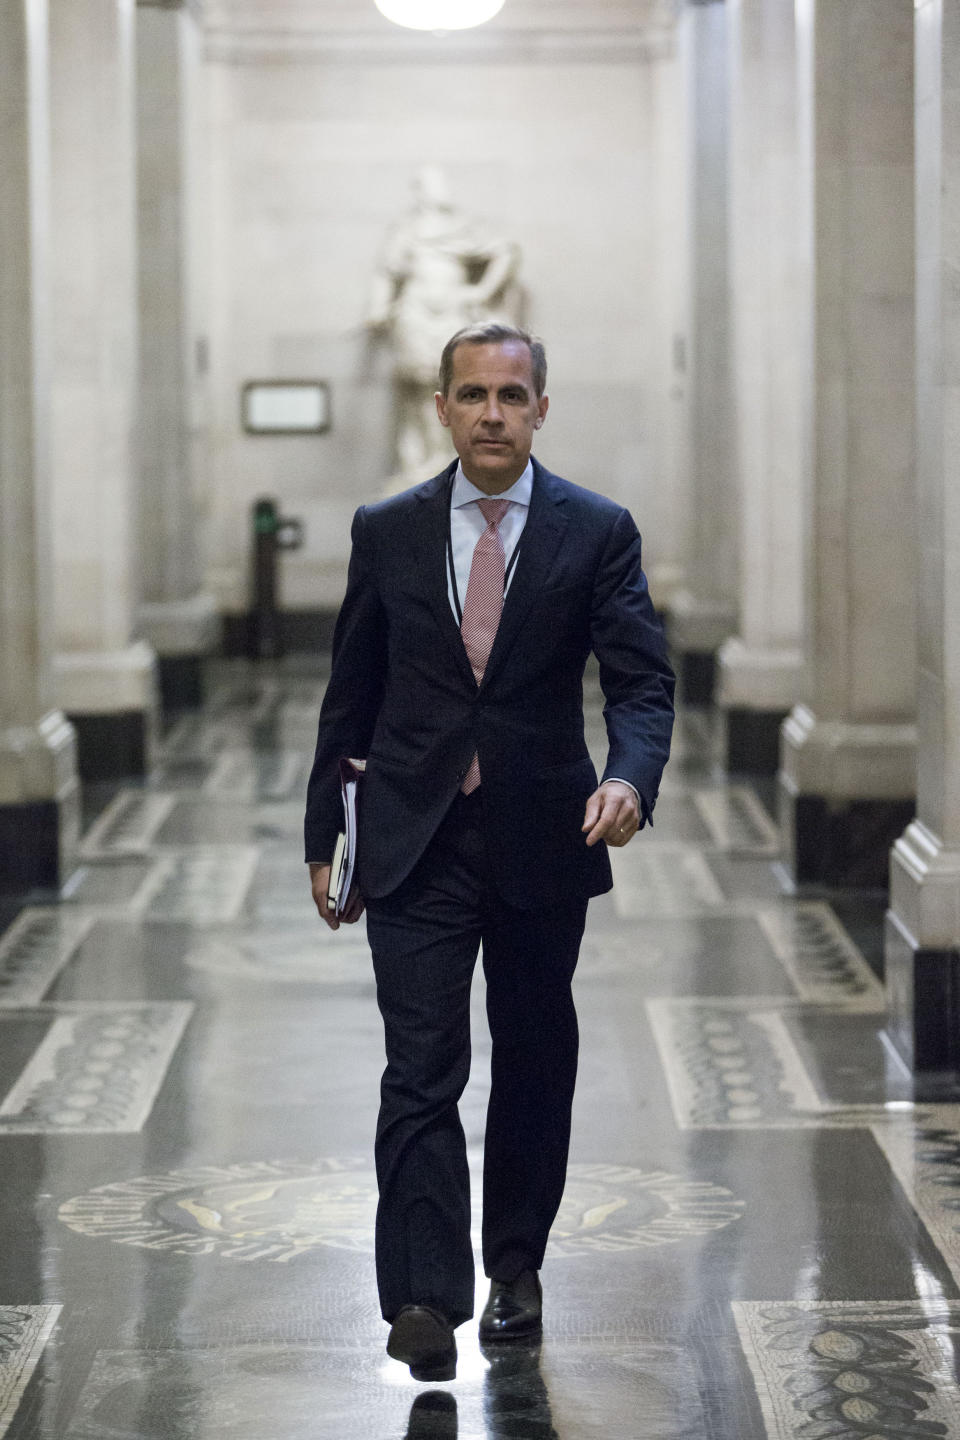 Mark Carney, governor of the Bank of England, walks to a monetary policy committee (MPC) briefing on his first day inside the central bank's headquarters in London.